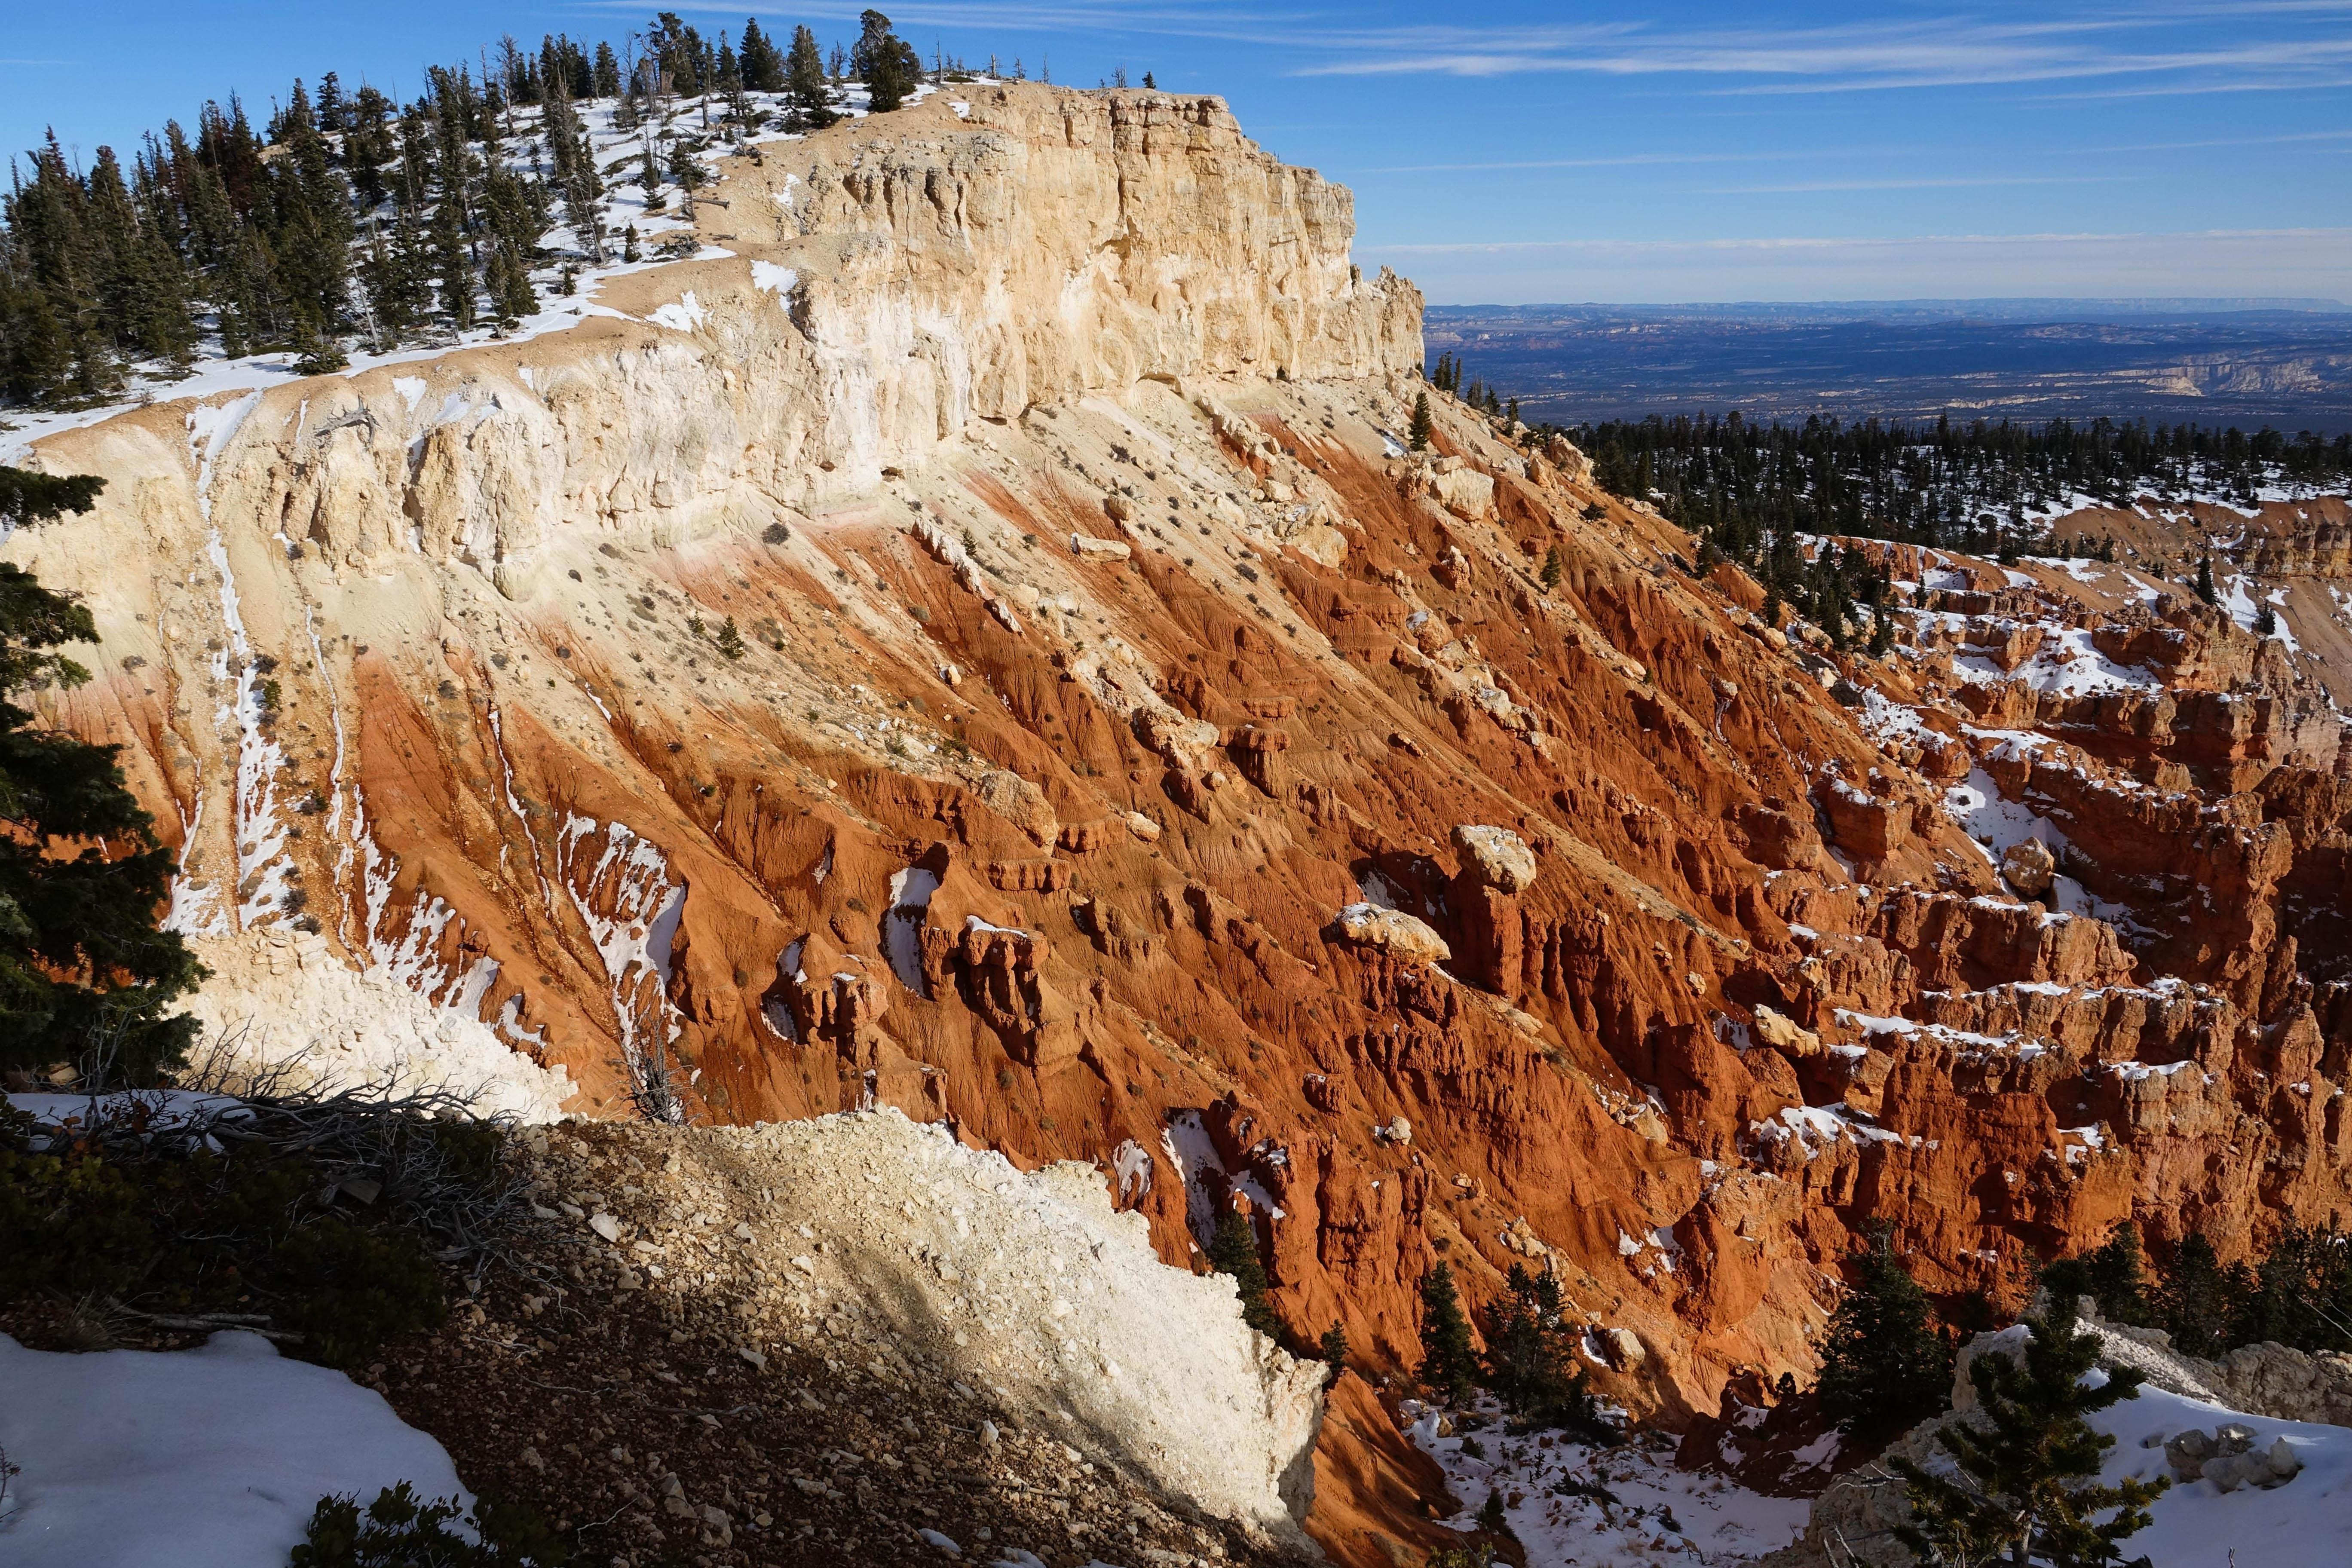 Red and white rock cliffs lightly dusted with snow with a forest atop them and a long view beyond